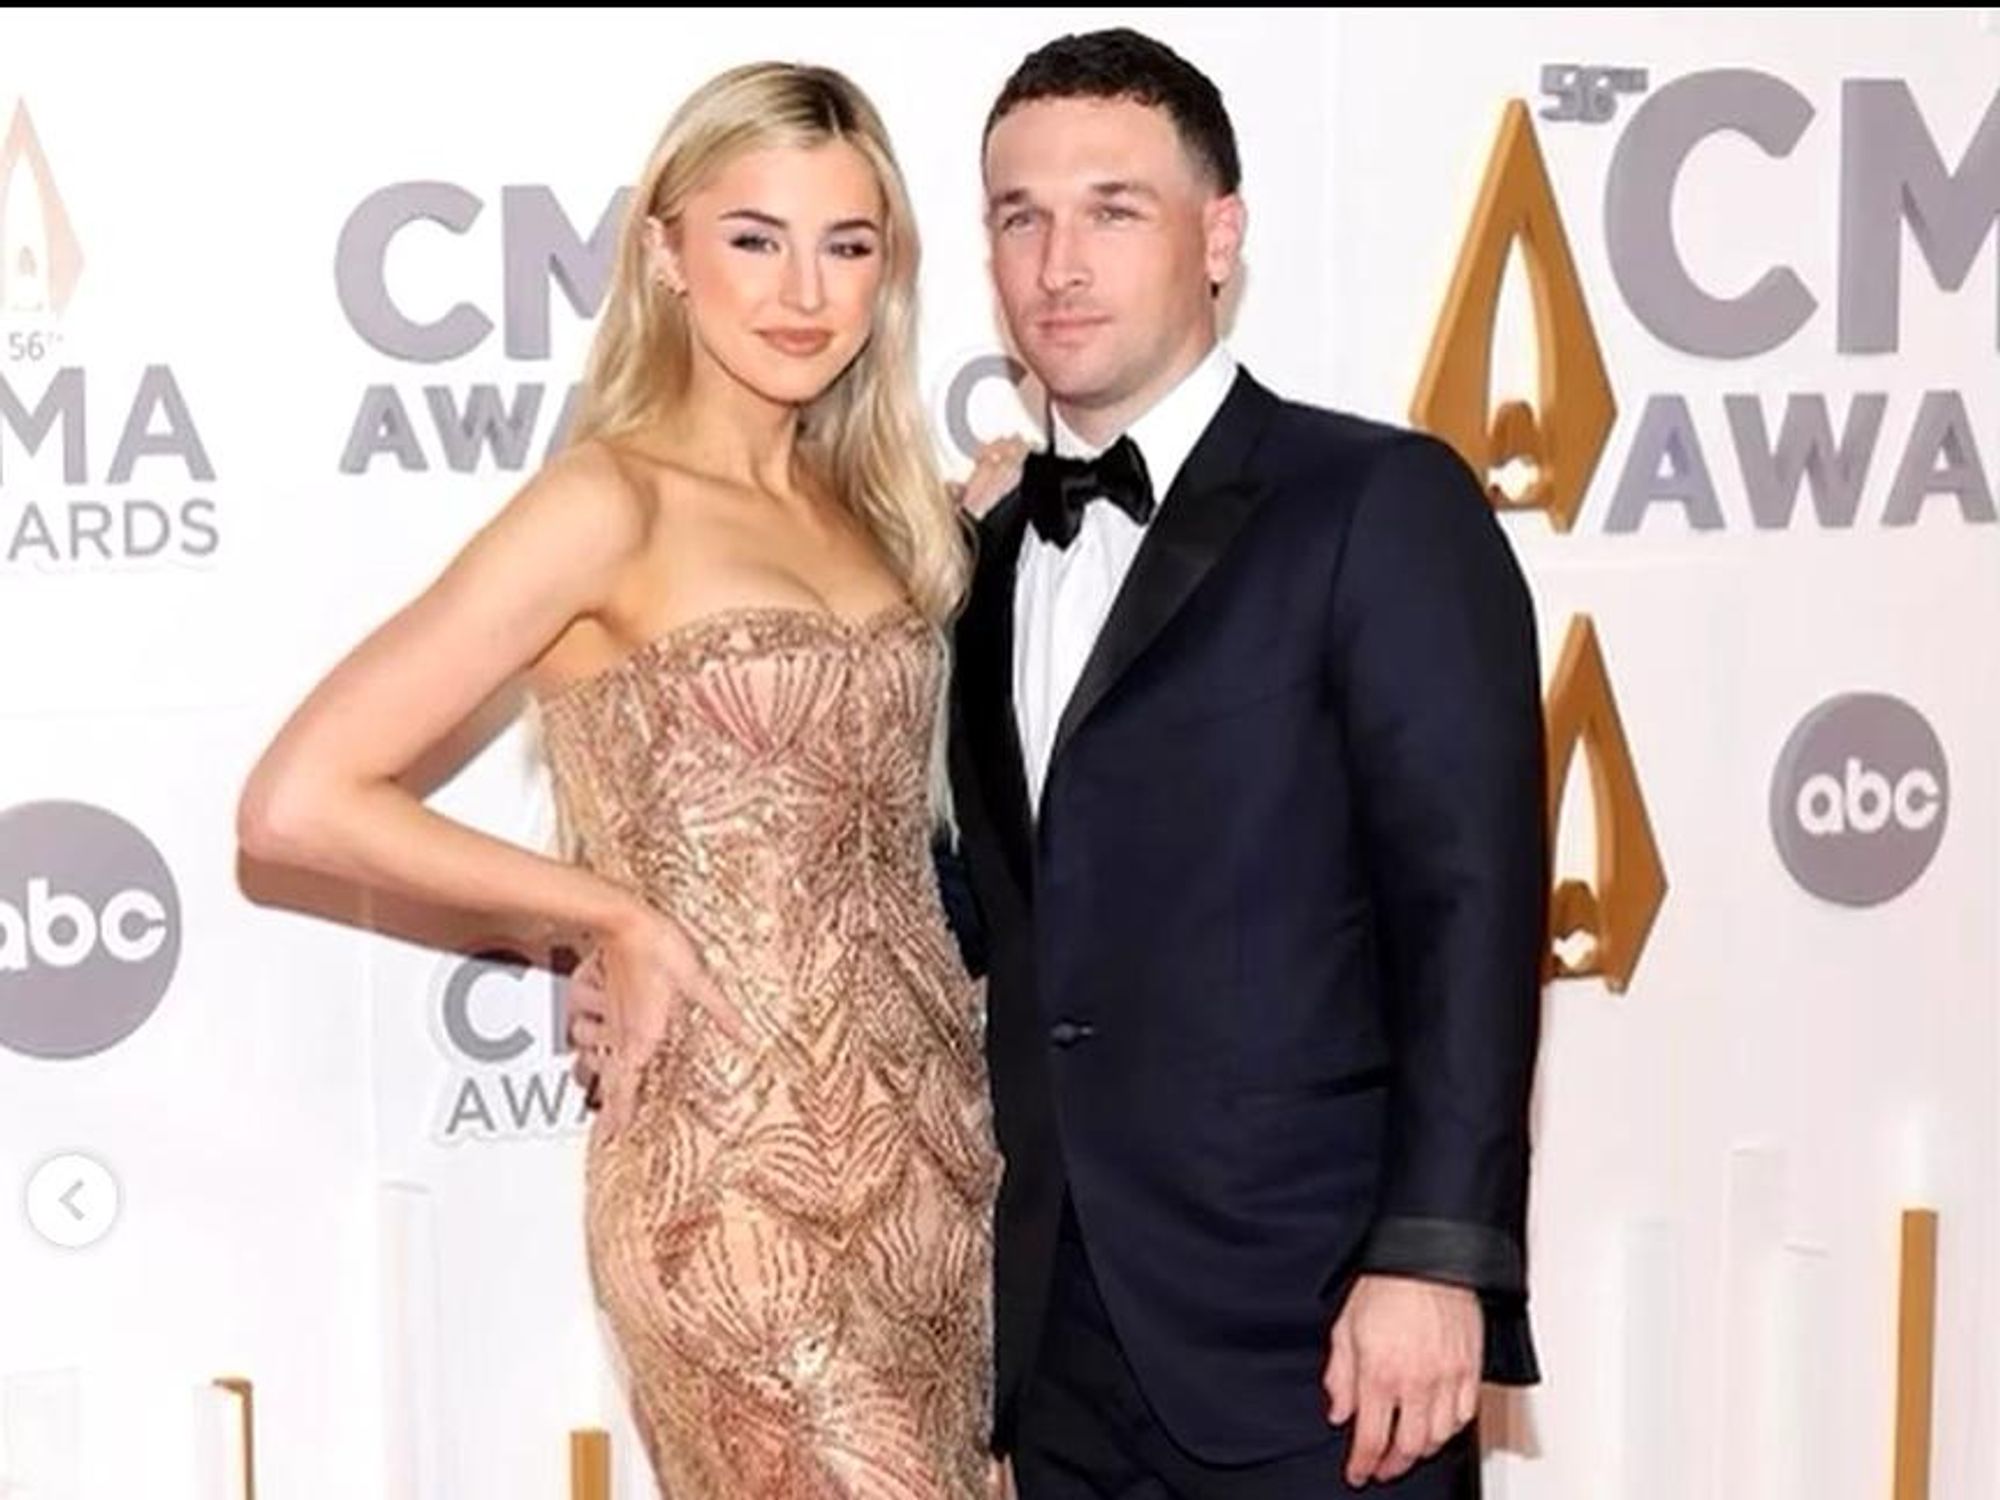 Alex Bregman rocks the red carpet with wife Reagan and returns to